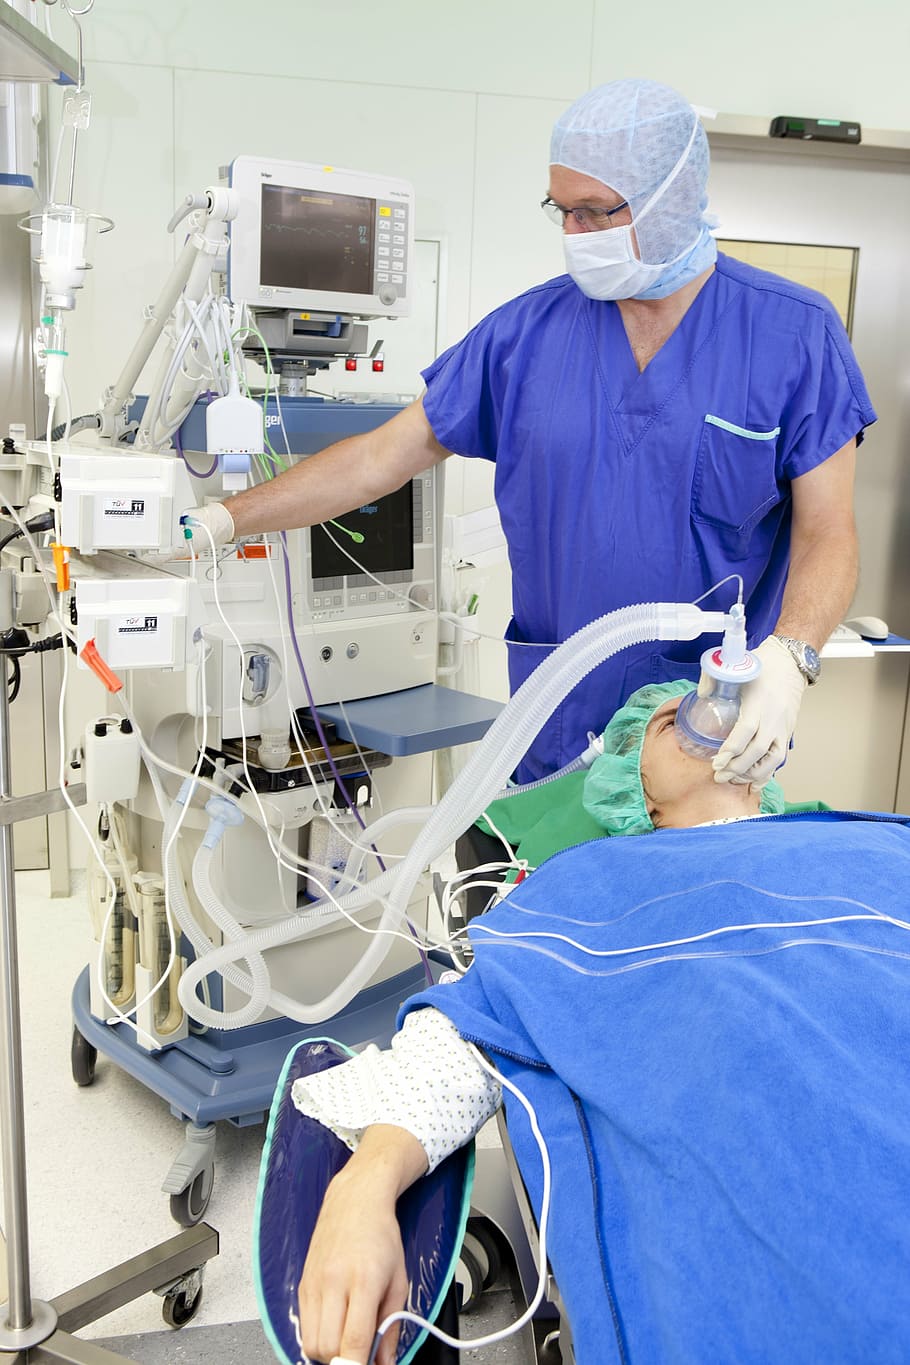 person, using, medical, equipment, patient, operation, respiratory mask, anesthesia, ill, injured